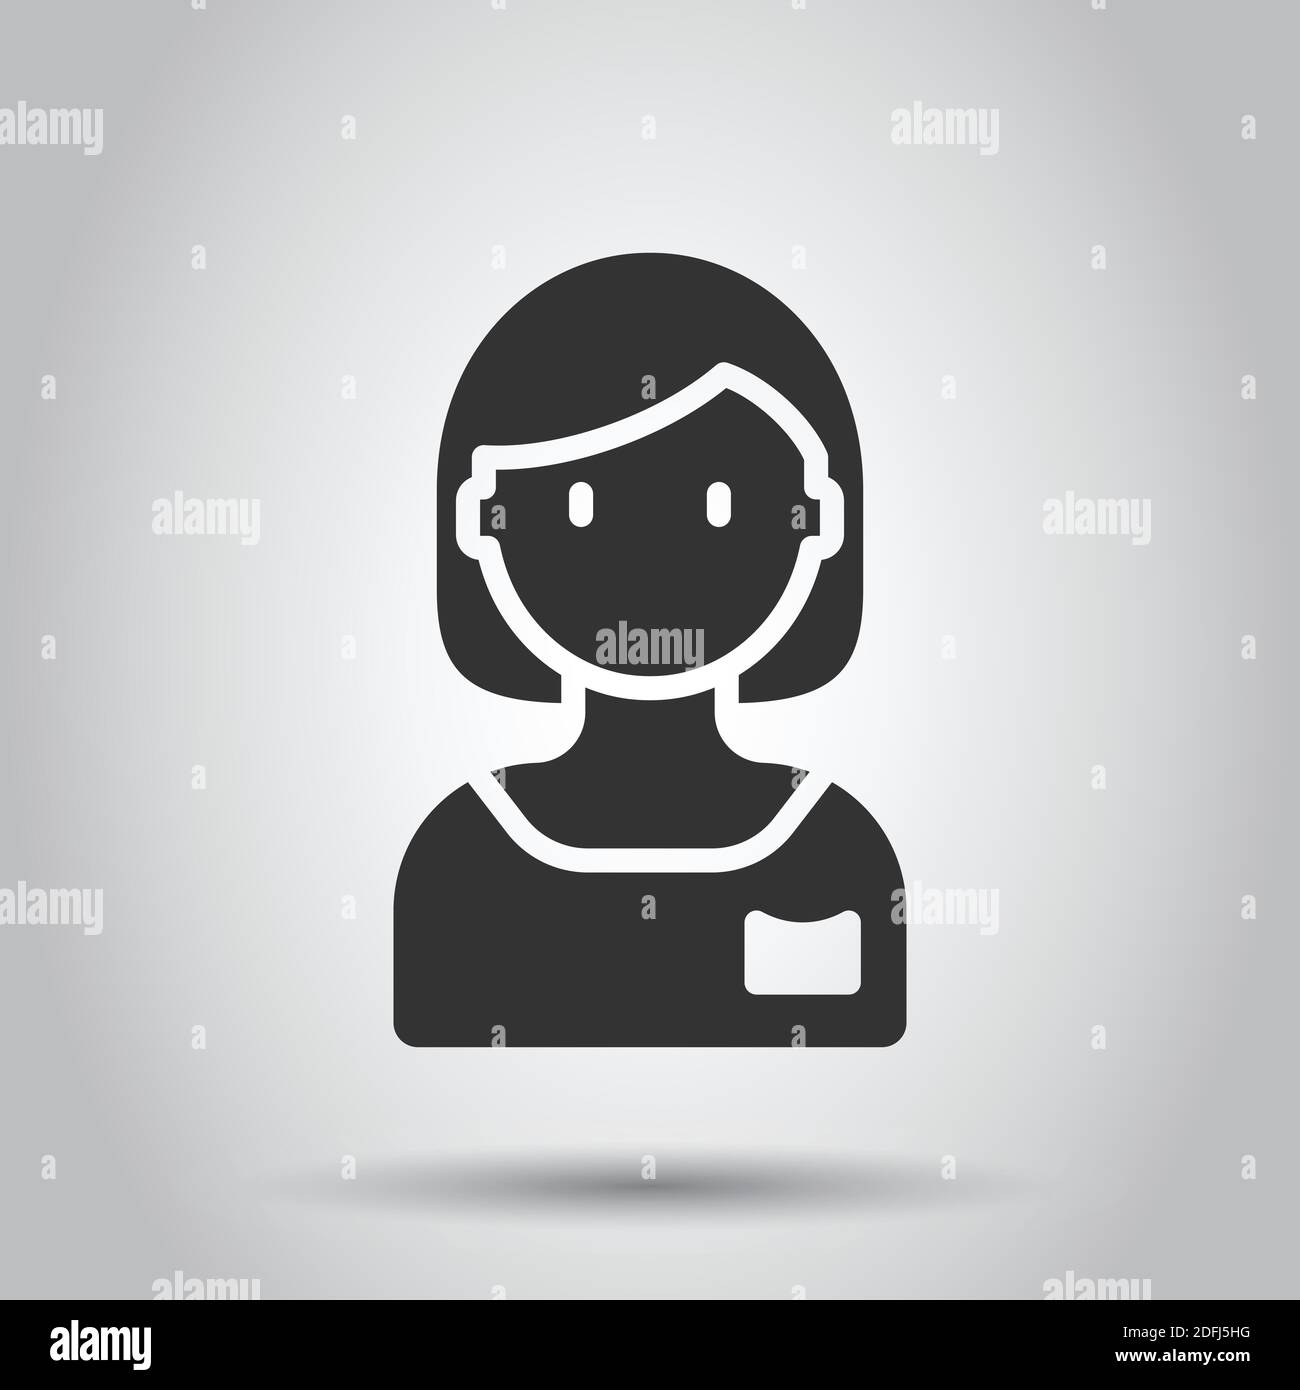 Woman face icon in flat style. People vector illustration on white background. Partnership business concept. Stock Vector